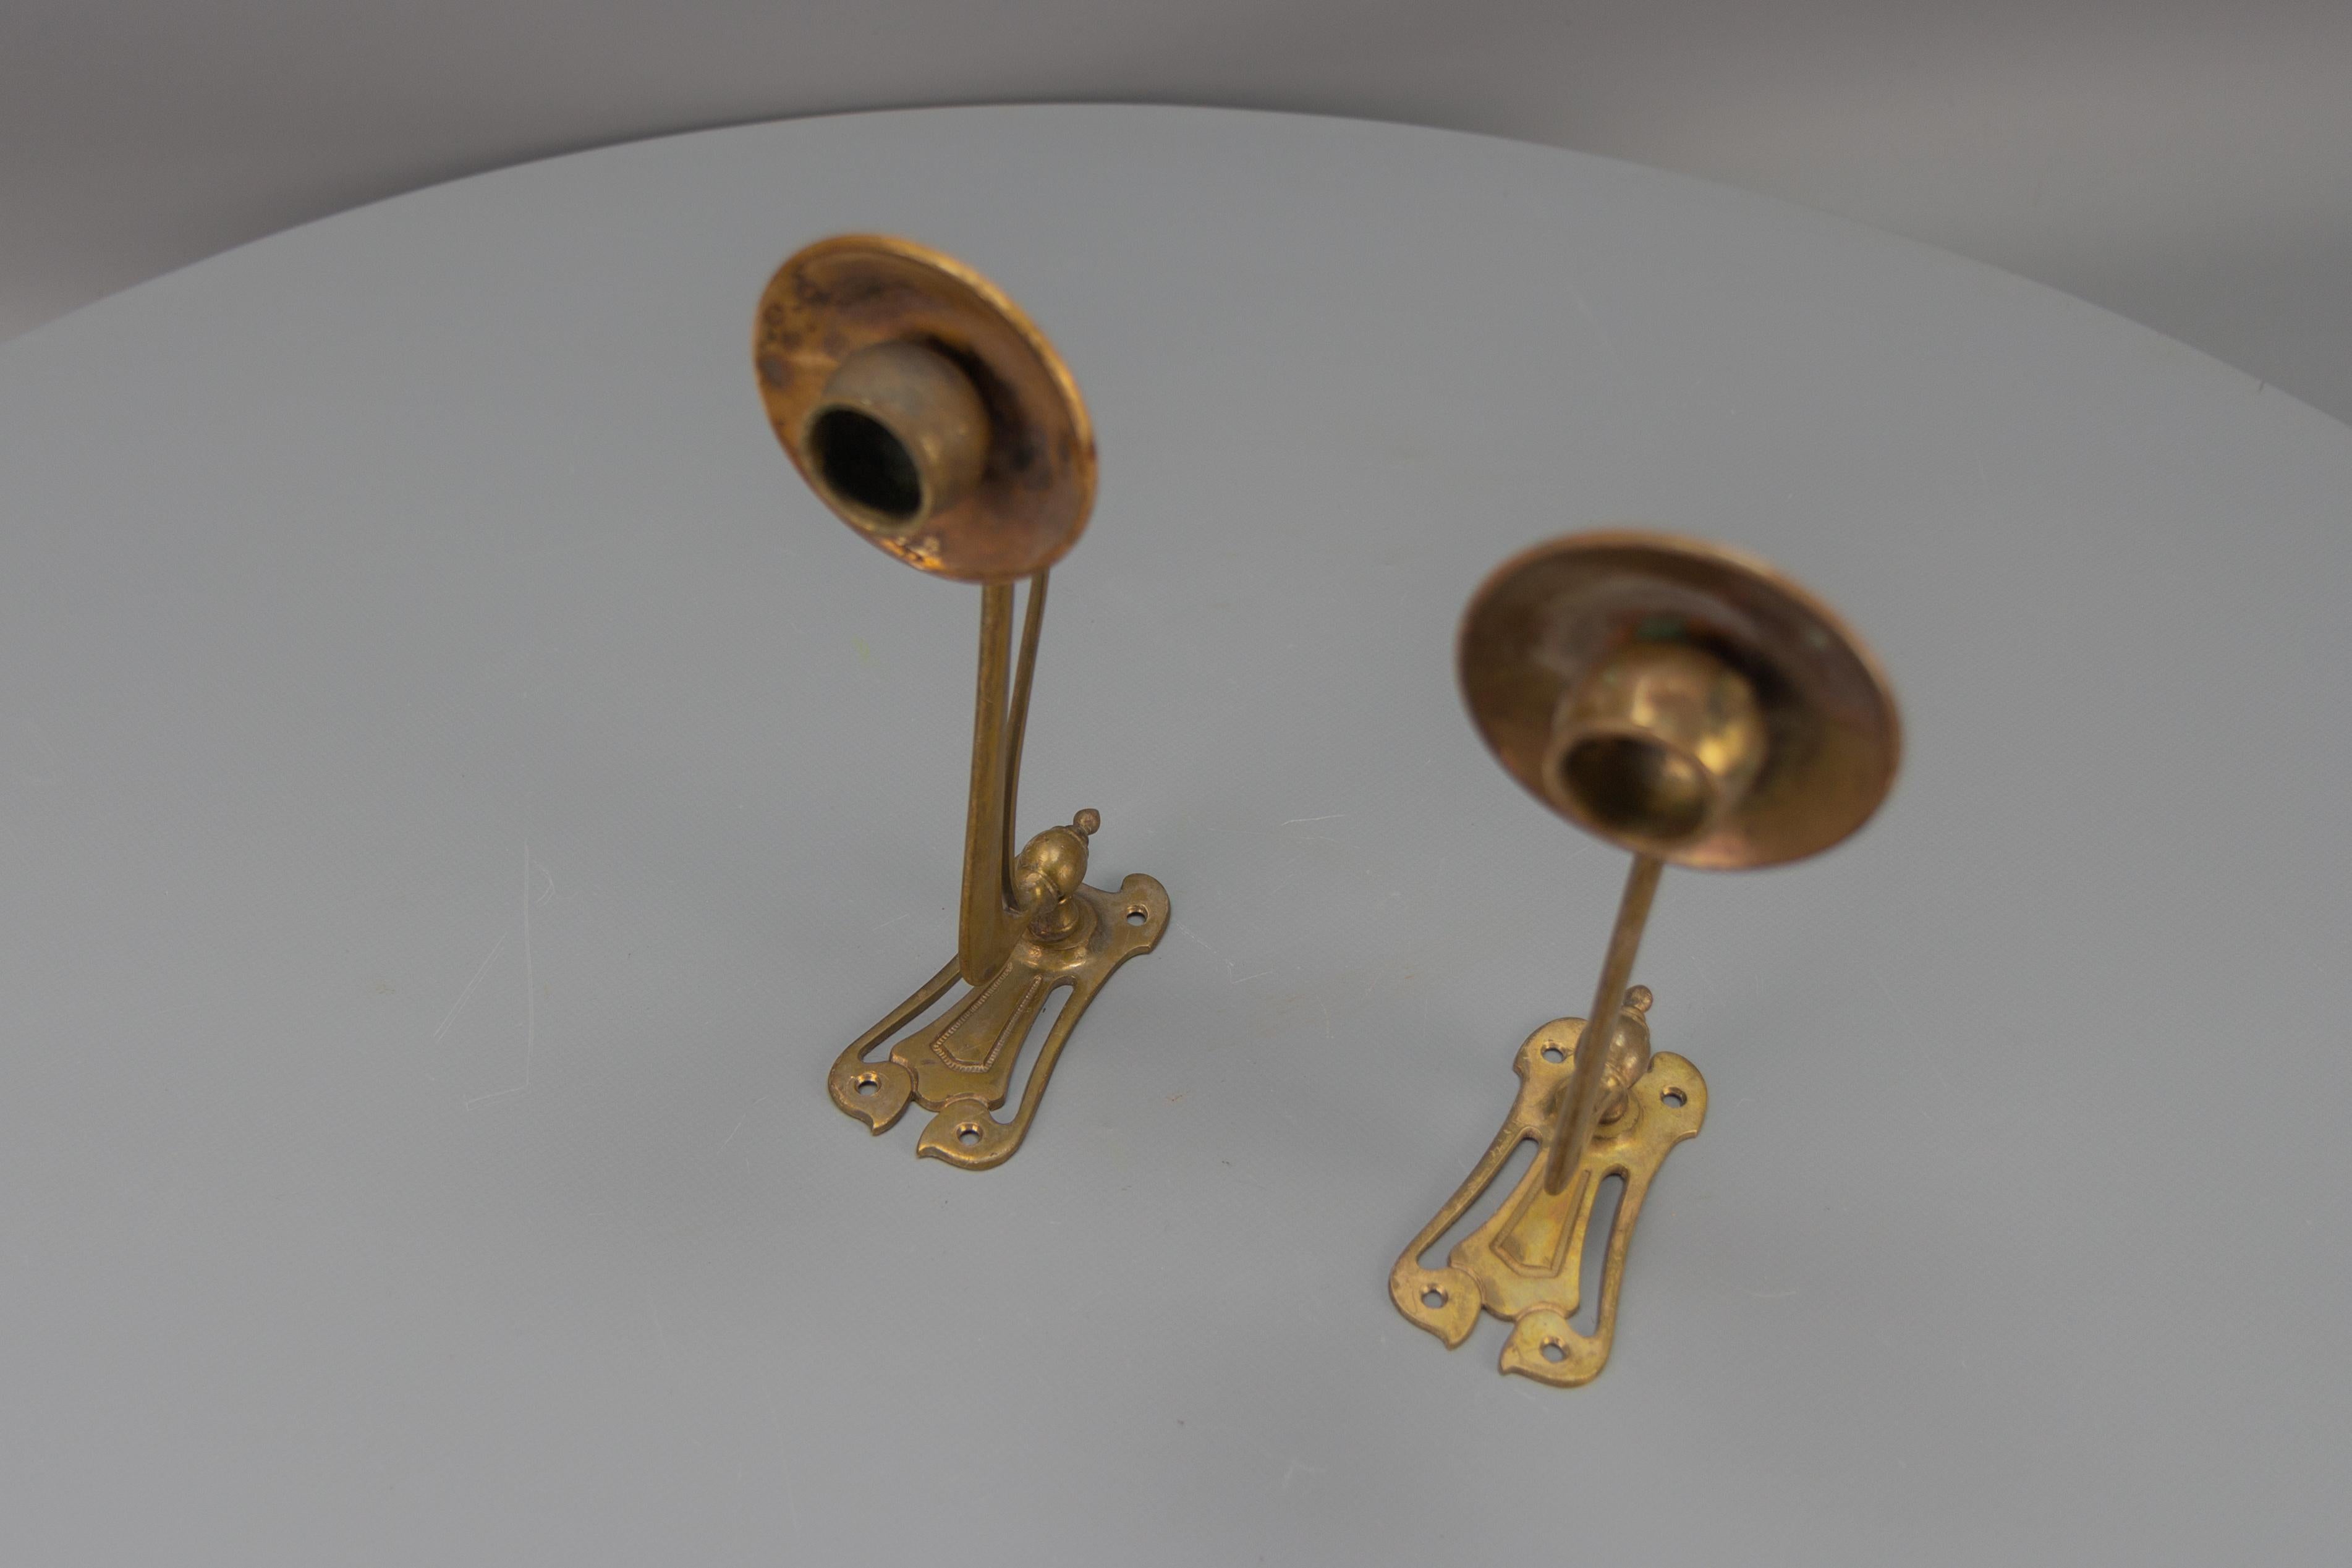 Pair of French Art Nouveau Brass Piano Wall Sconces Swivel Candle Holders, 1920 For Sale 5